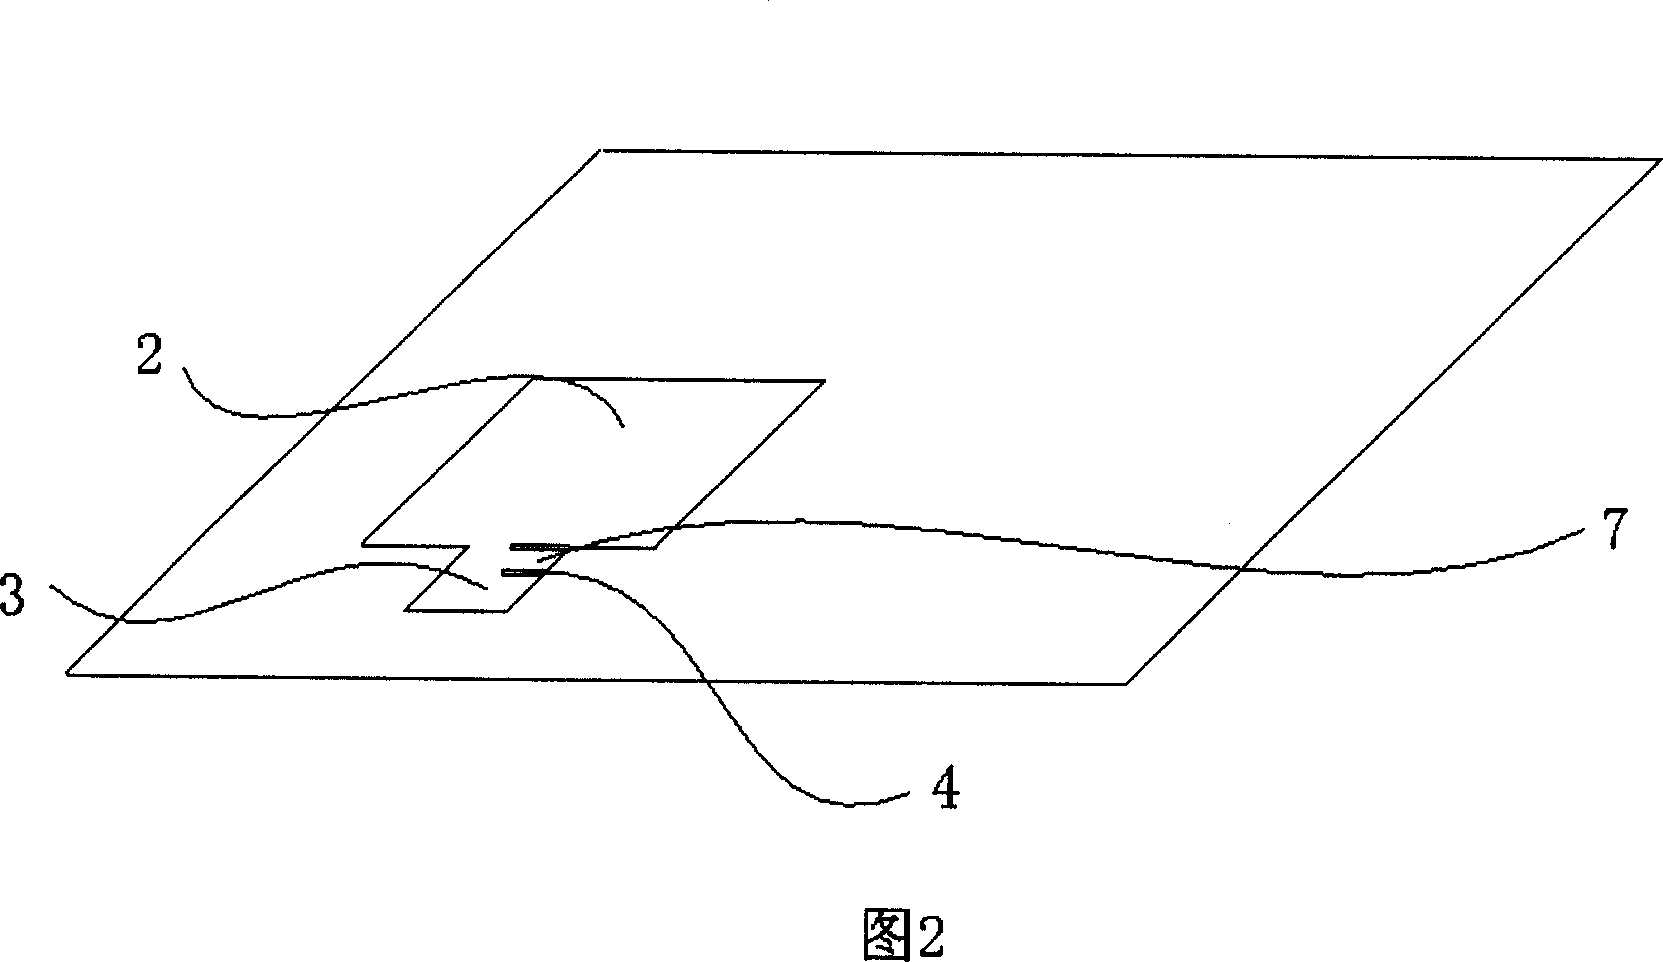 Multi-layer flexible circuit board and its producing method